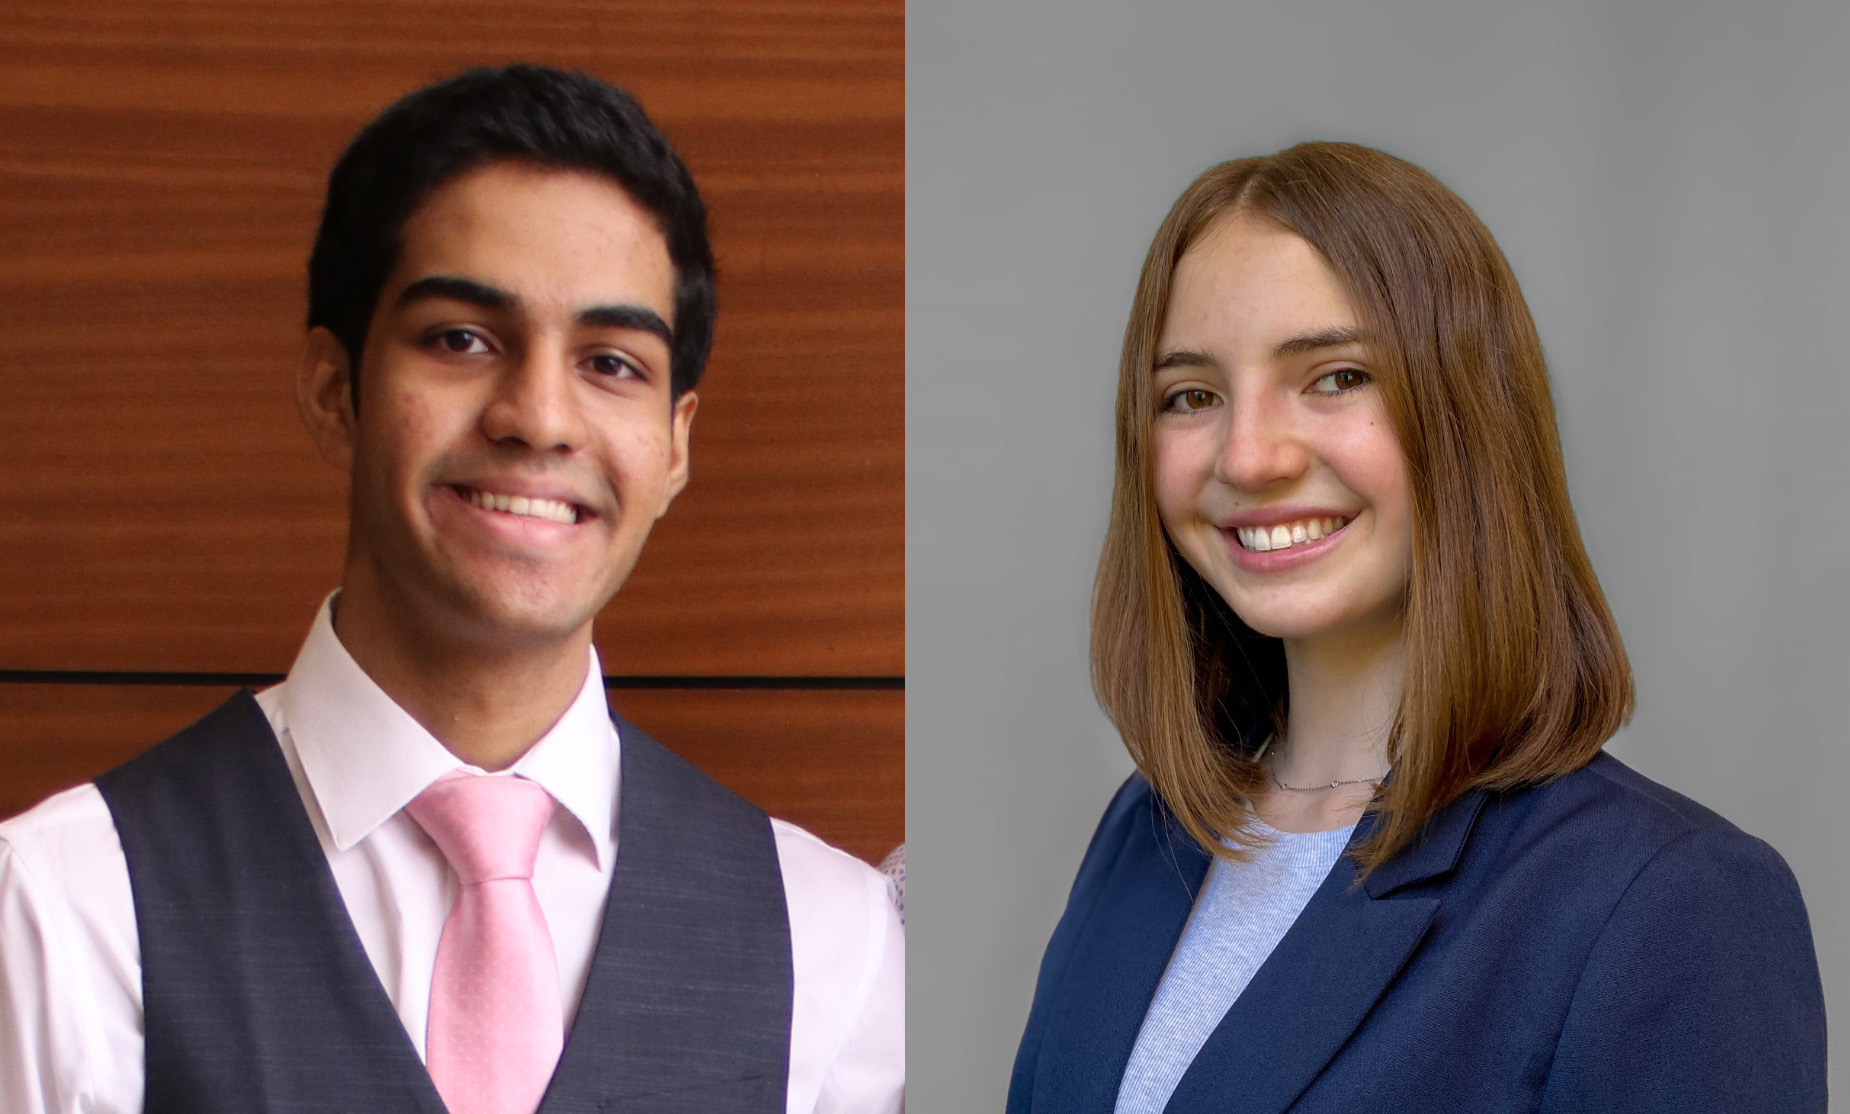 Karan Samat,left, and Katy Wolhaupter were selected for the 2022 Tracy Undergraduate Research Fellowship